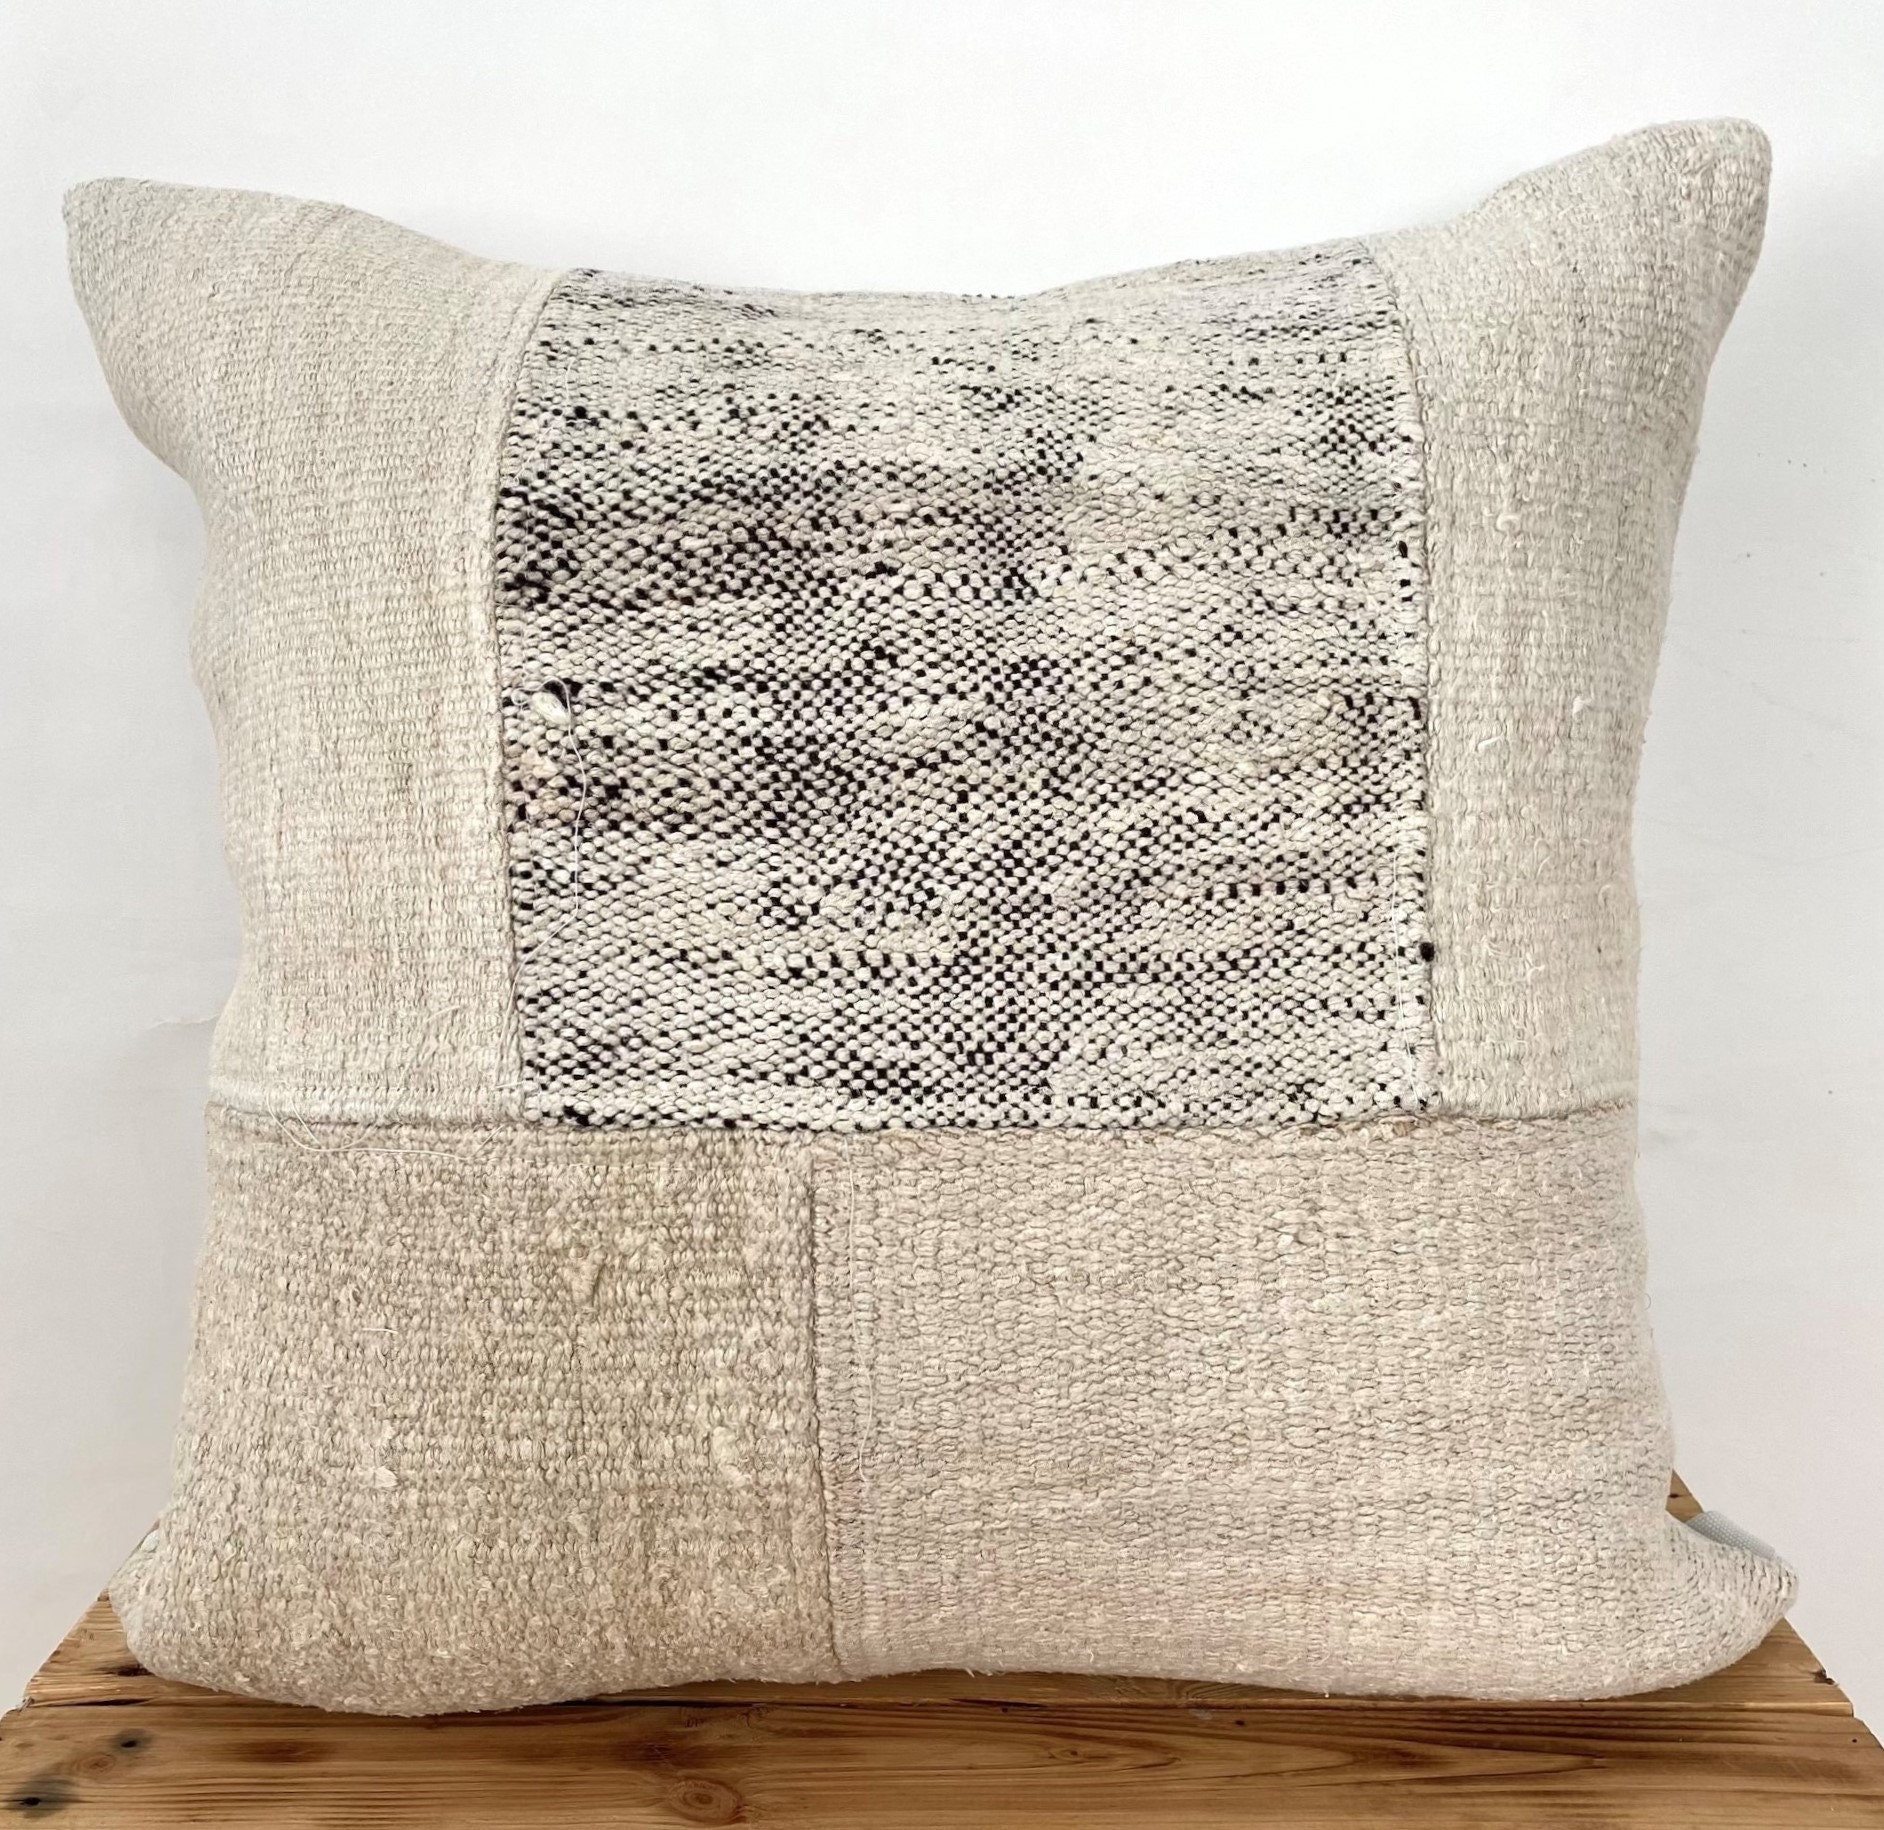 Couch Pillow Decorative Pillow Handmade Vintage Cushion White Hemp Pillow Cover PE-1234 24 x 24 Turkish Pillow Cover Home Decor